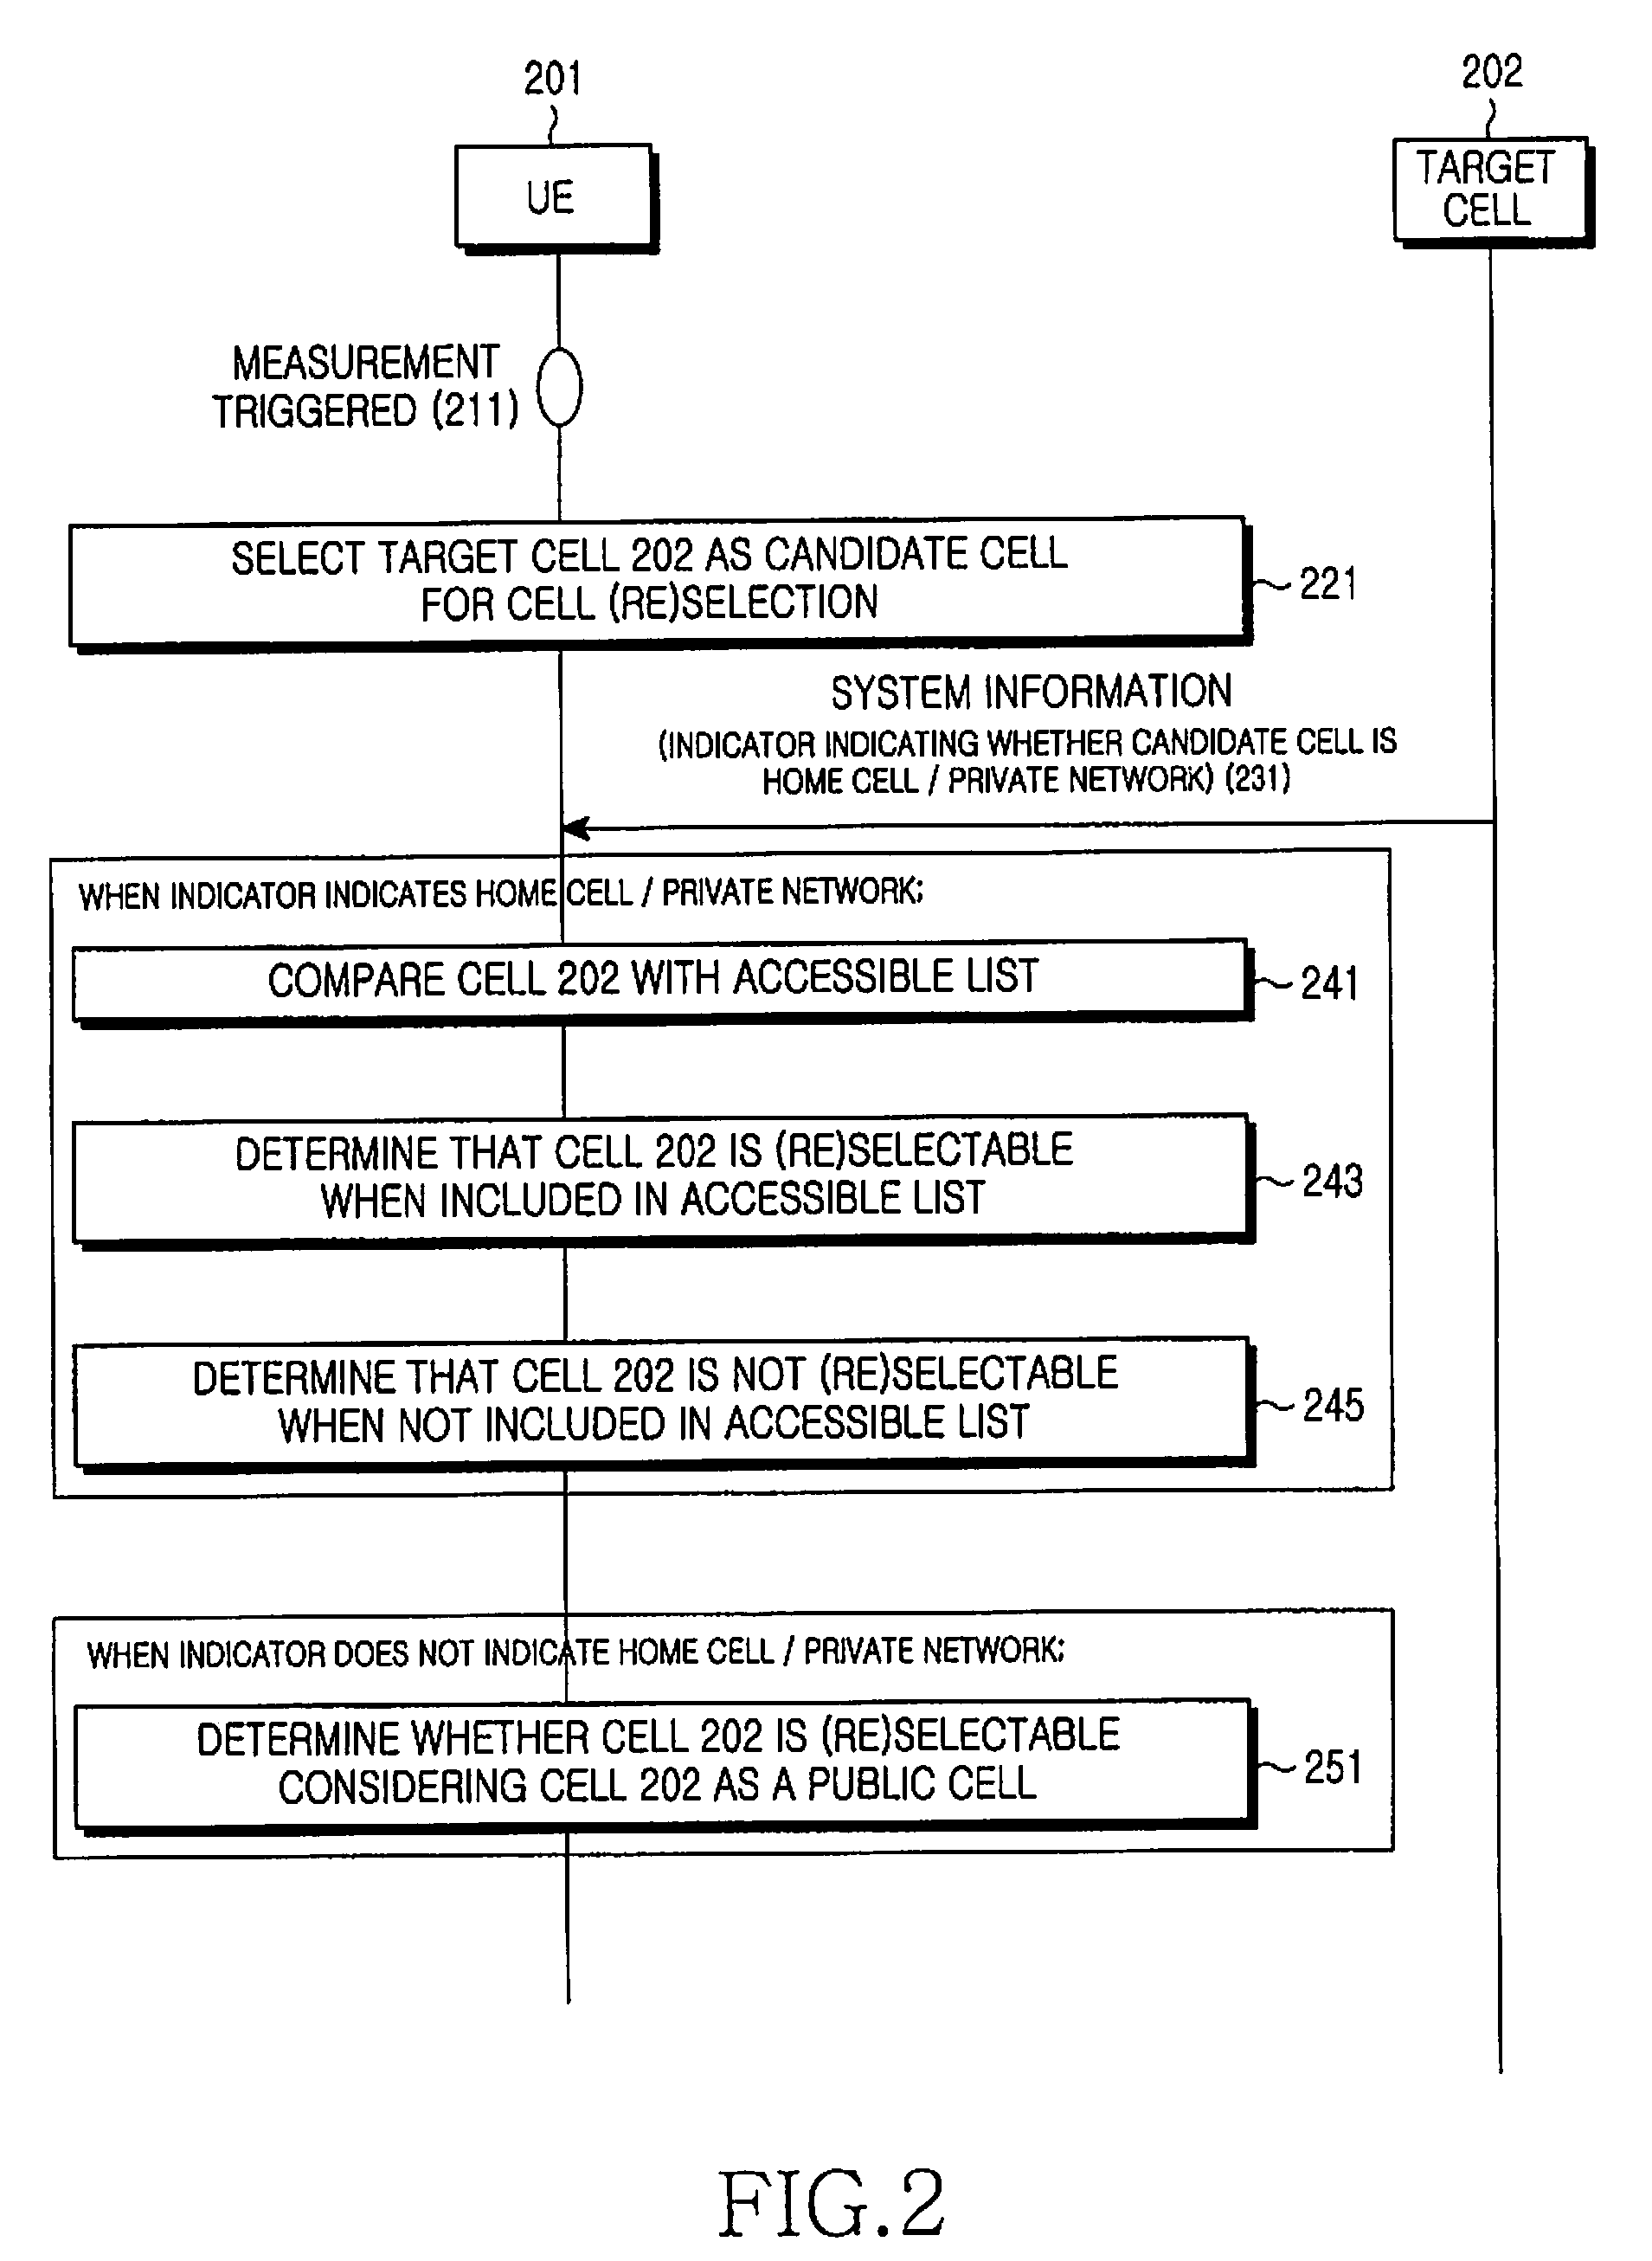 Apparatus and method for performing cell selection to home cell or private network in a mobile communication system